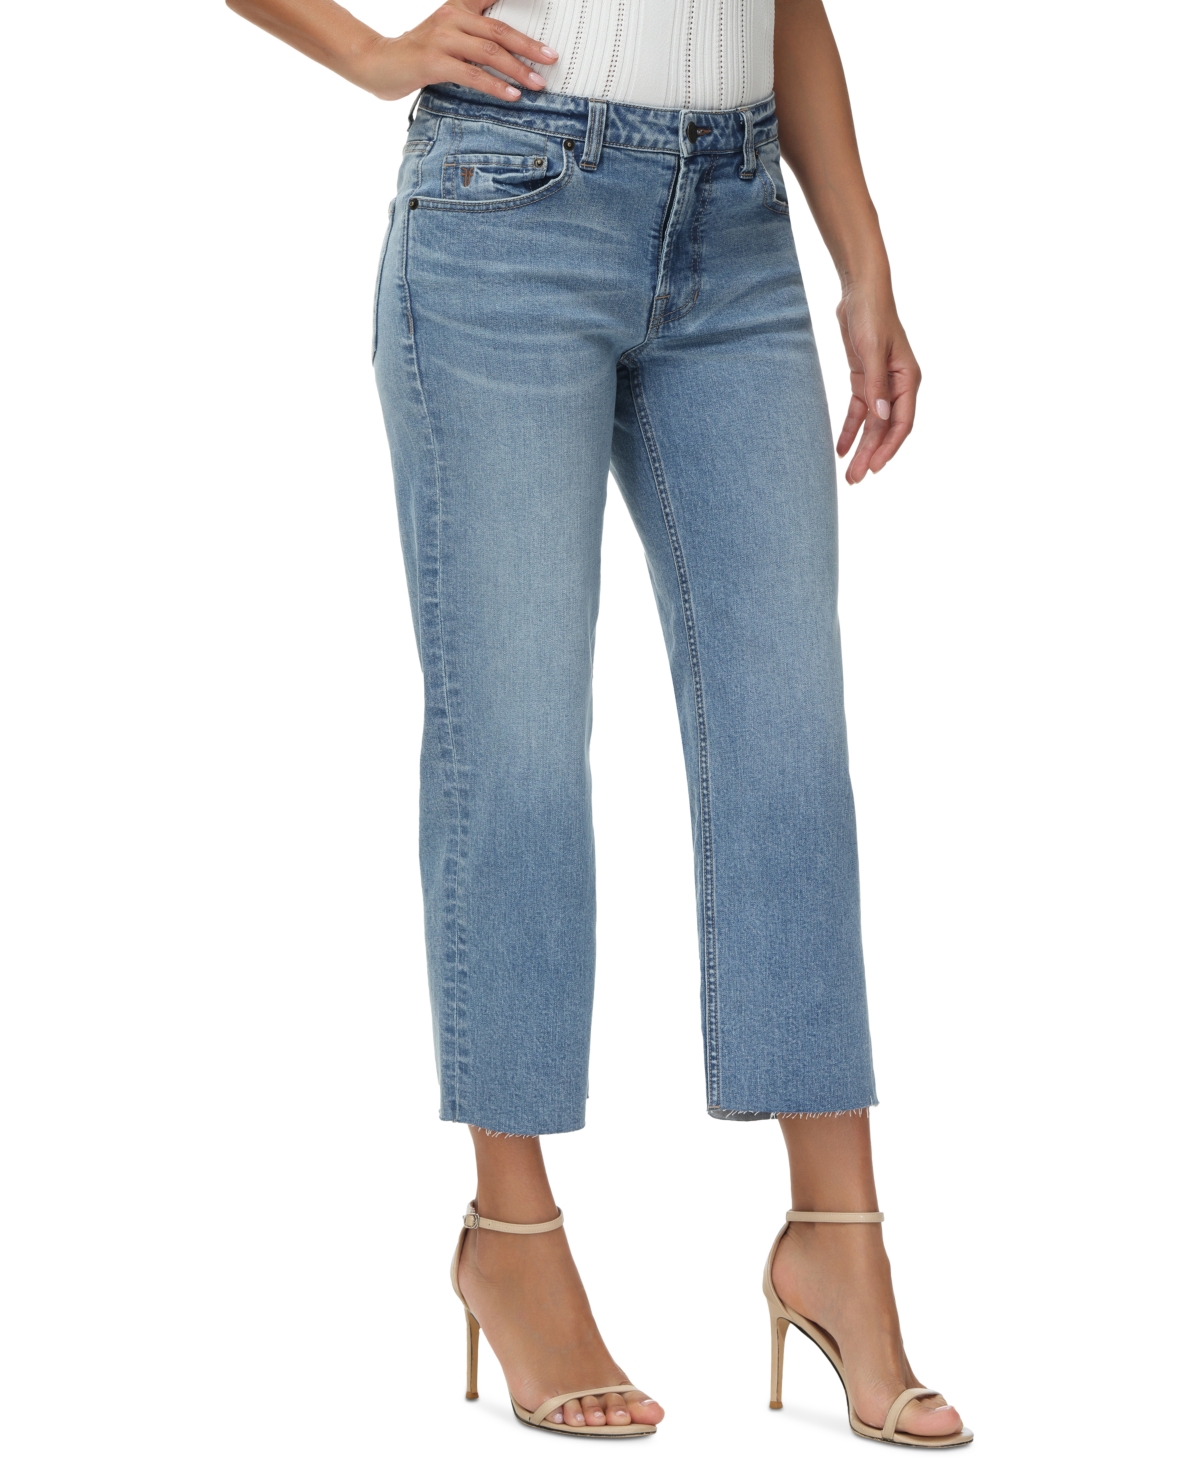 Women's Low-Rise Straight Cropped Jeans - Riviera Wash